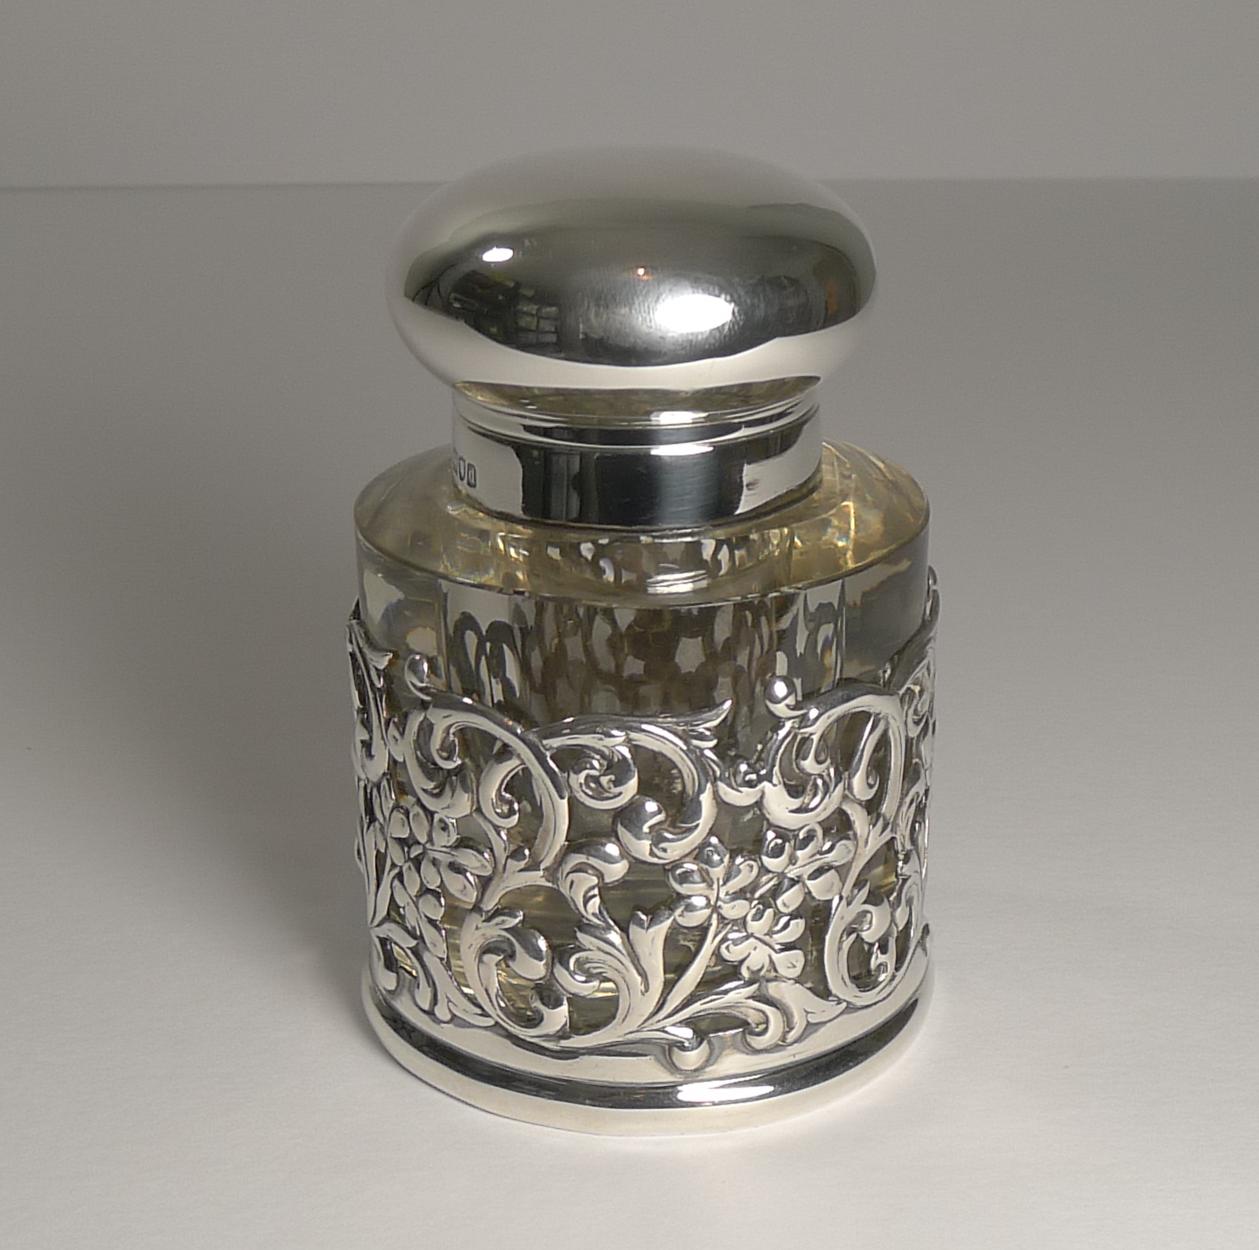 A beautiful late Victorian inkwell made from a hefty piece of English crystal or circular form with the underside intricately handcut in the ever-popular hobnail design.

The body of the glass is cased in a pierced or reticulated sterling silver